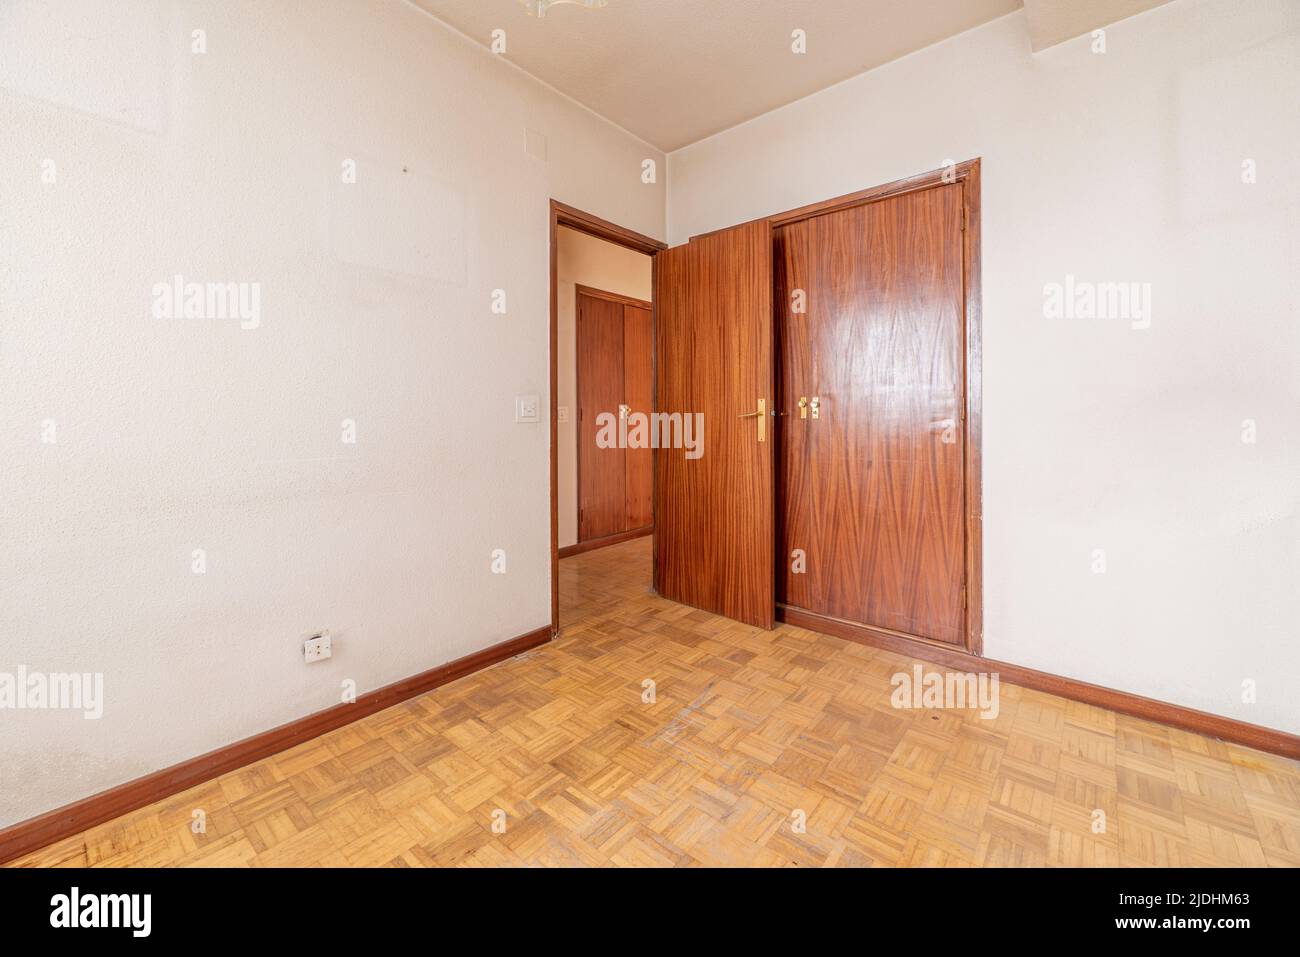 Empty room with plain white painted walls, built-in wardrobe with wooden doors to match the carpentry Stock Photo